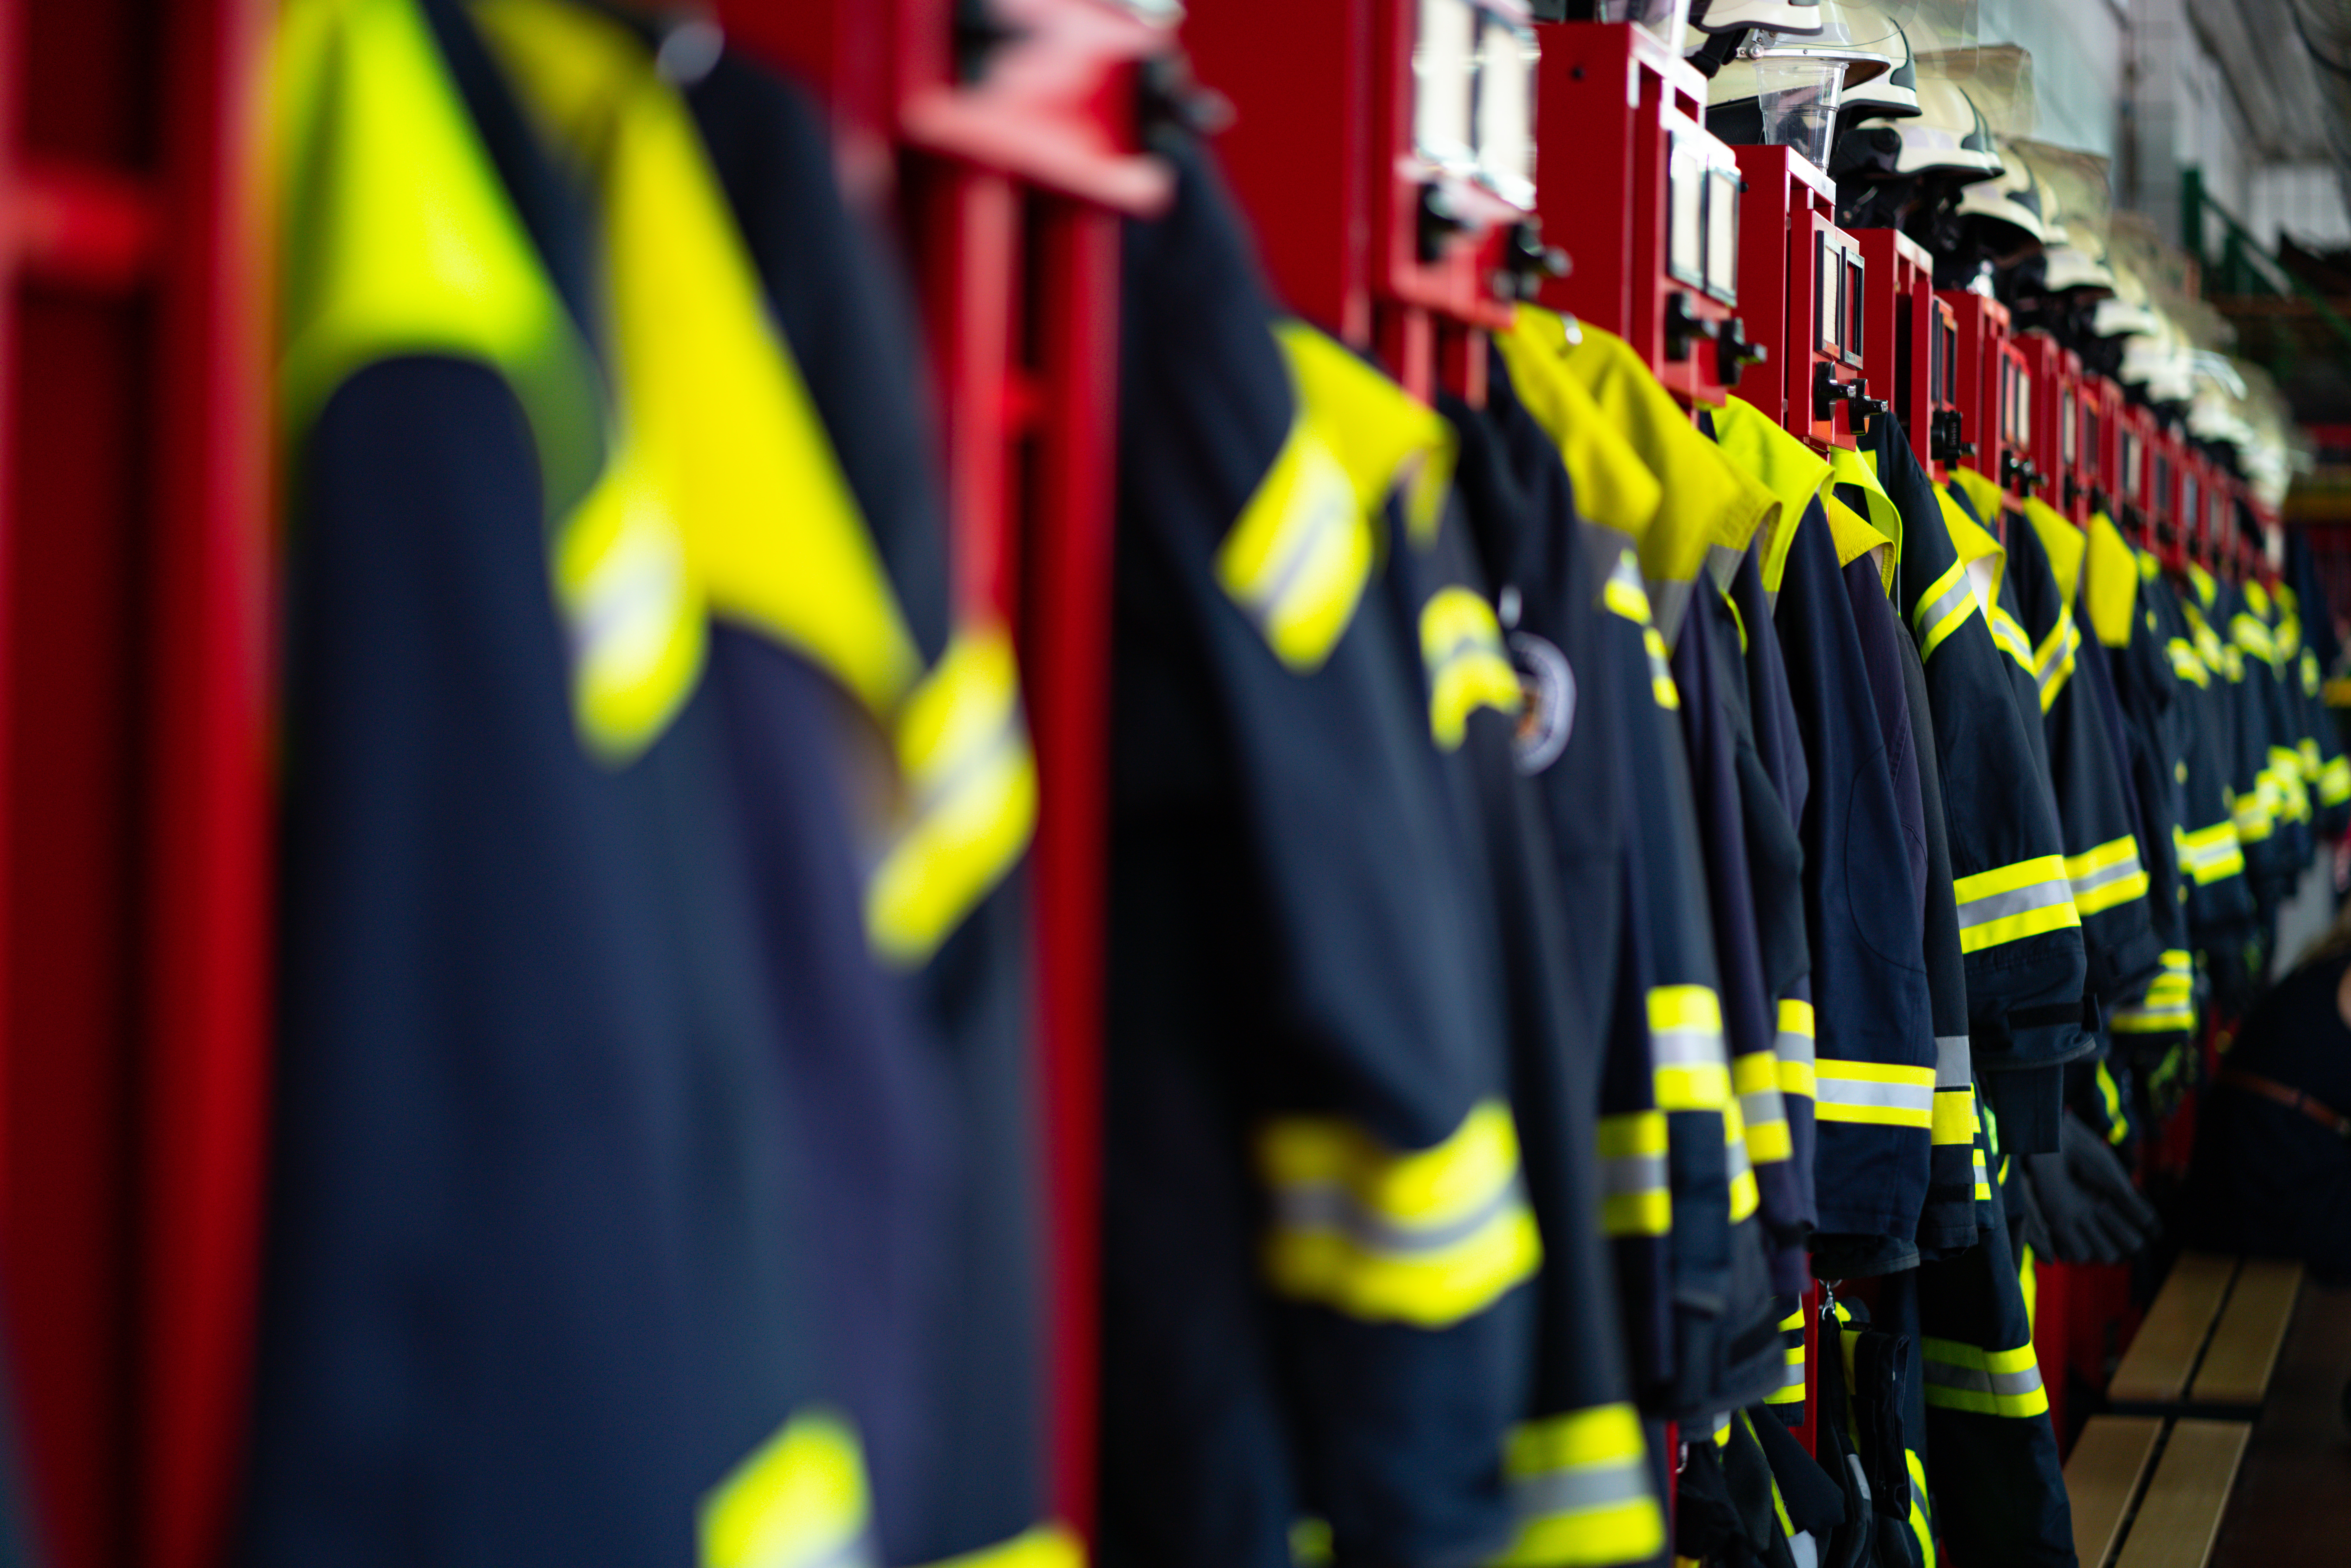 Firefighters&#039; suits lined up in a firestation. 